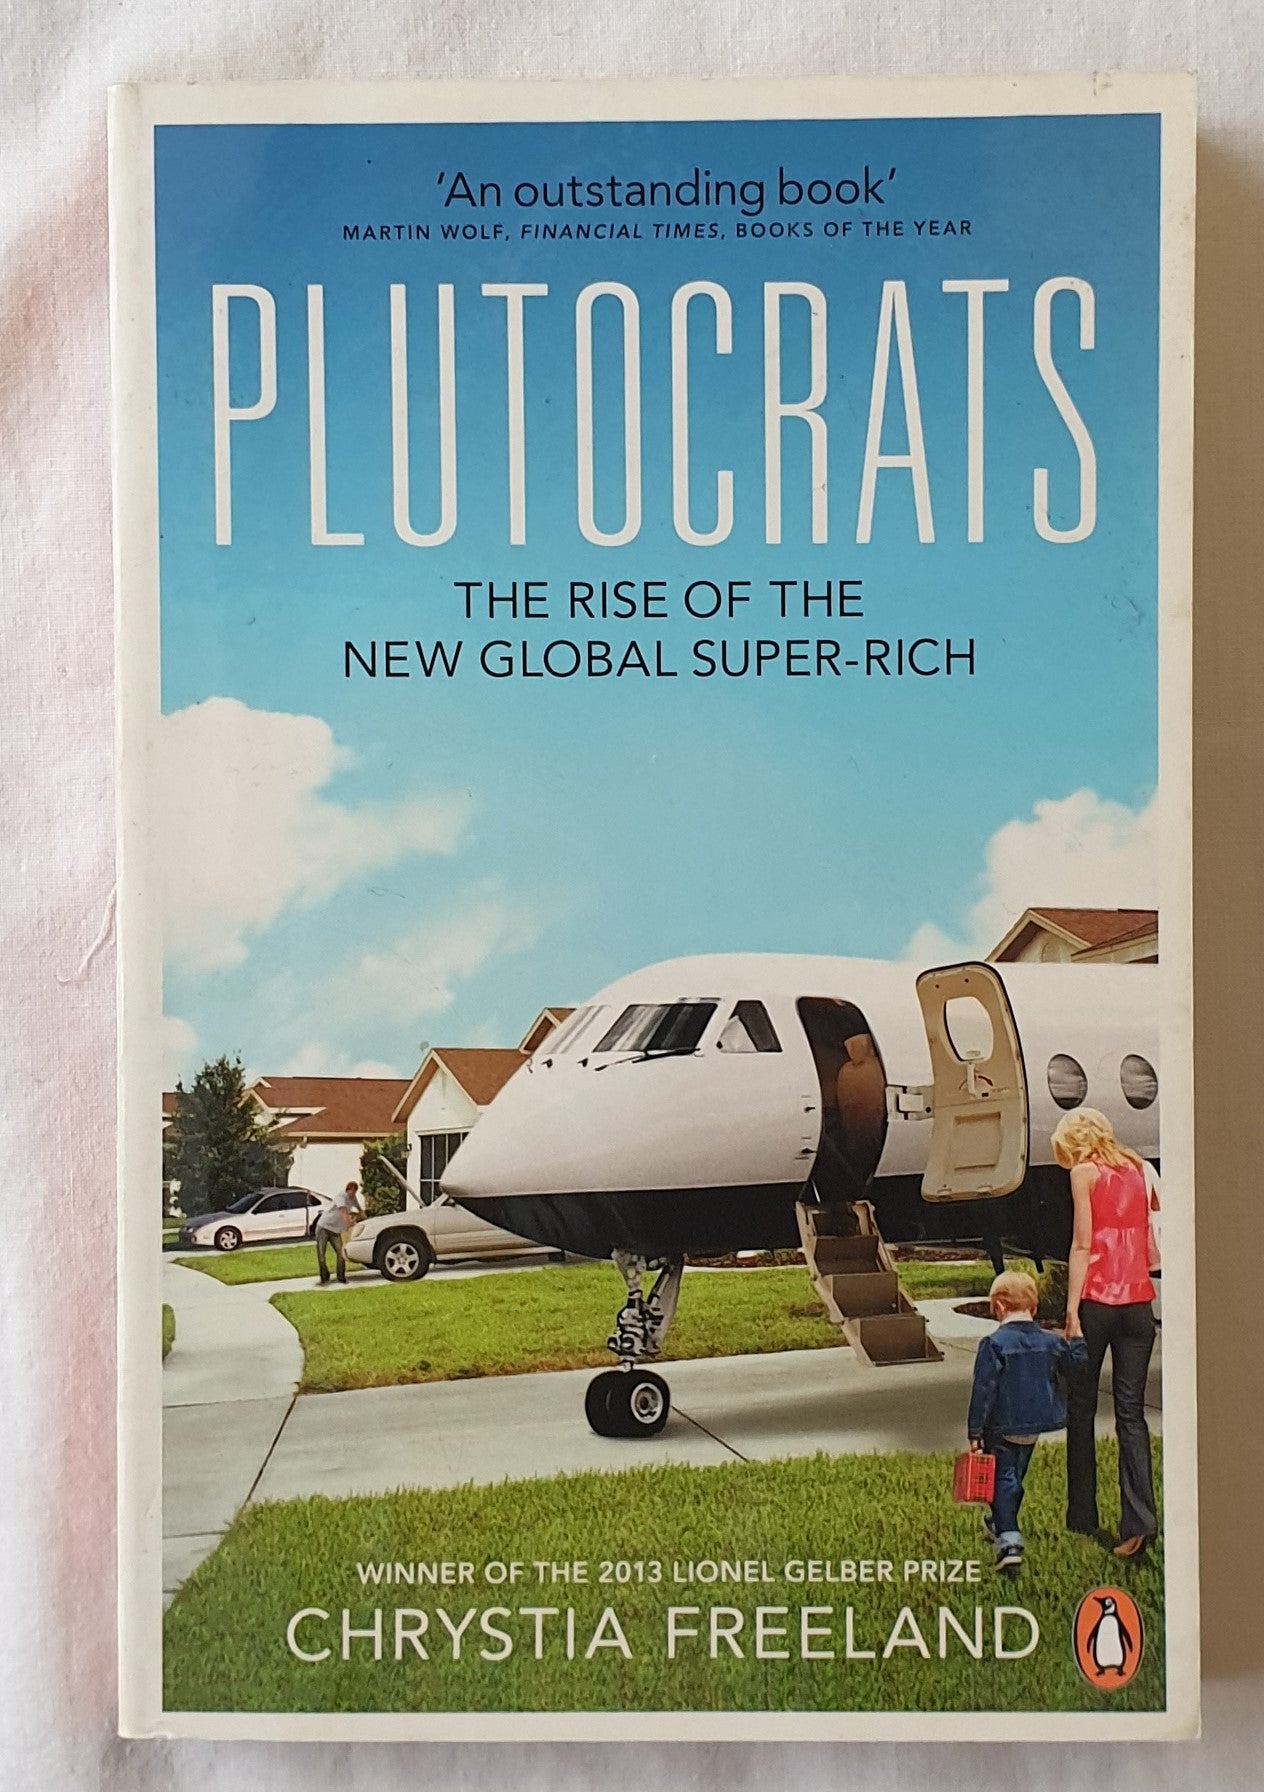 Plutocrats  The Rise of the New Global Super-Rich  by Chrystia Freeland